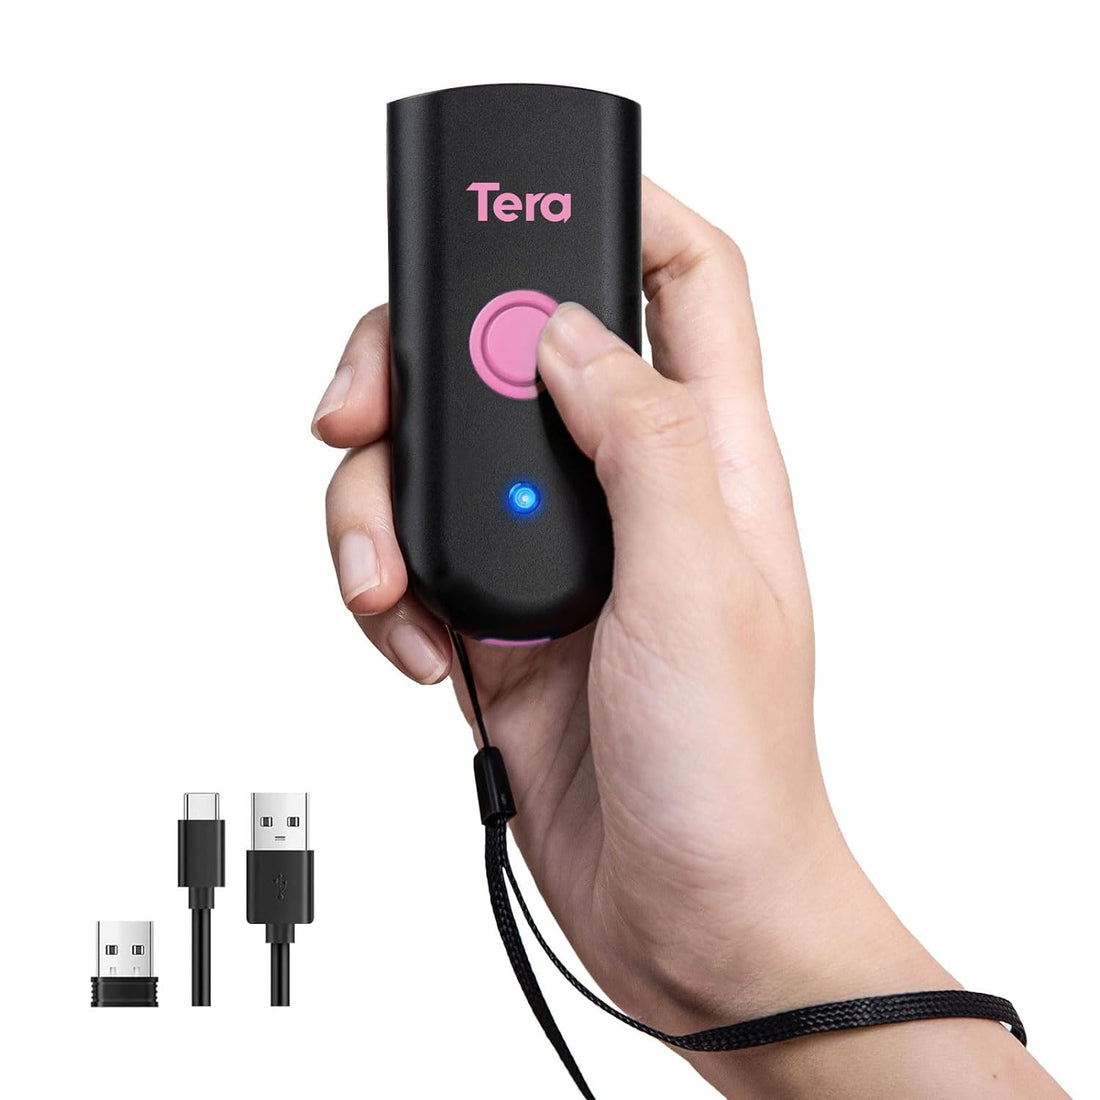 Tera Mini 1D Barcode Scanner: Pocket Waterproof Wireless Laser Scanner 3 in 1 Compatible with Bluetooth USB Wired Portable Bar Code Reader for Store Logistics Work with iOS Windows Android 1100L Pink